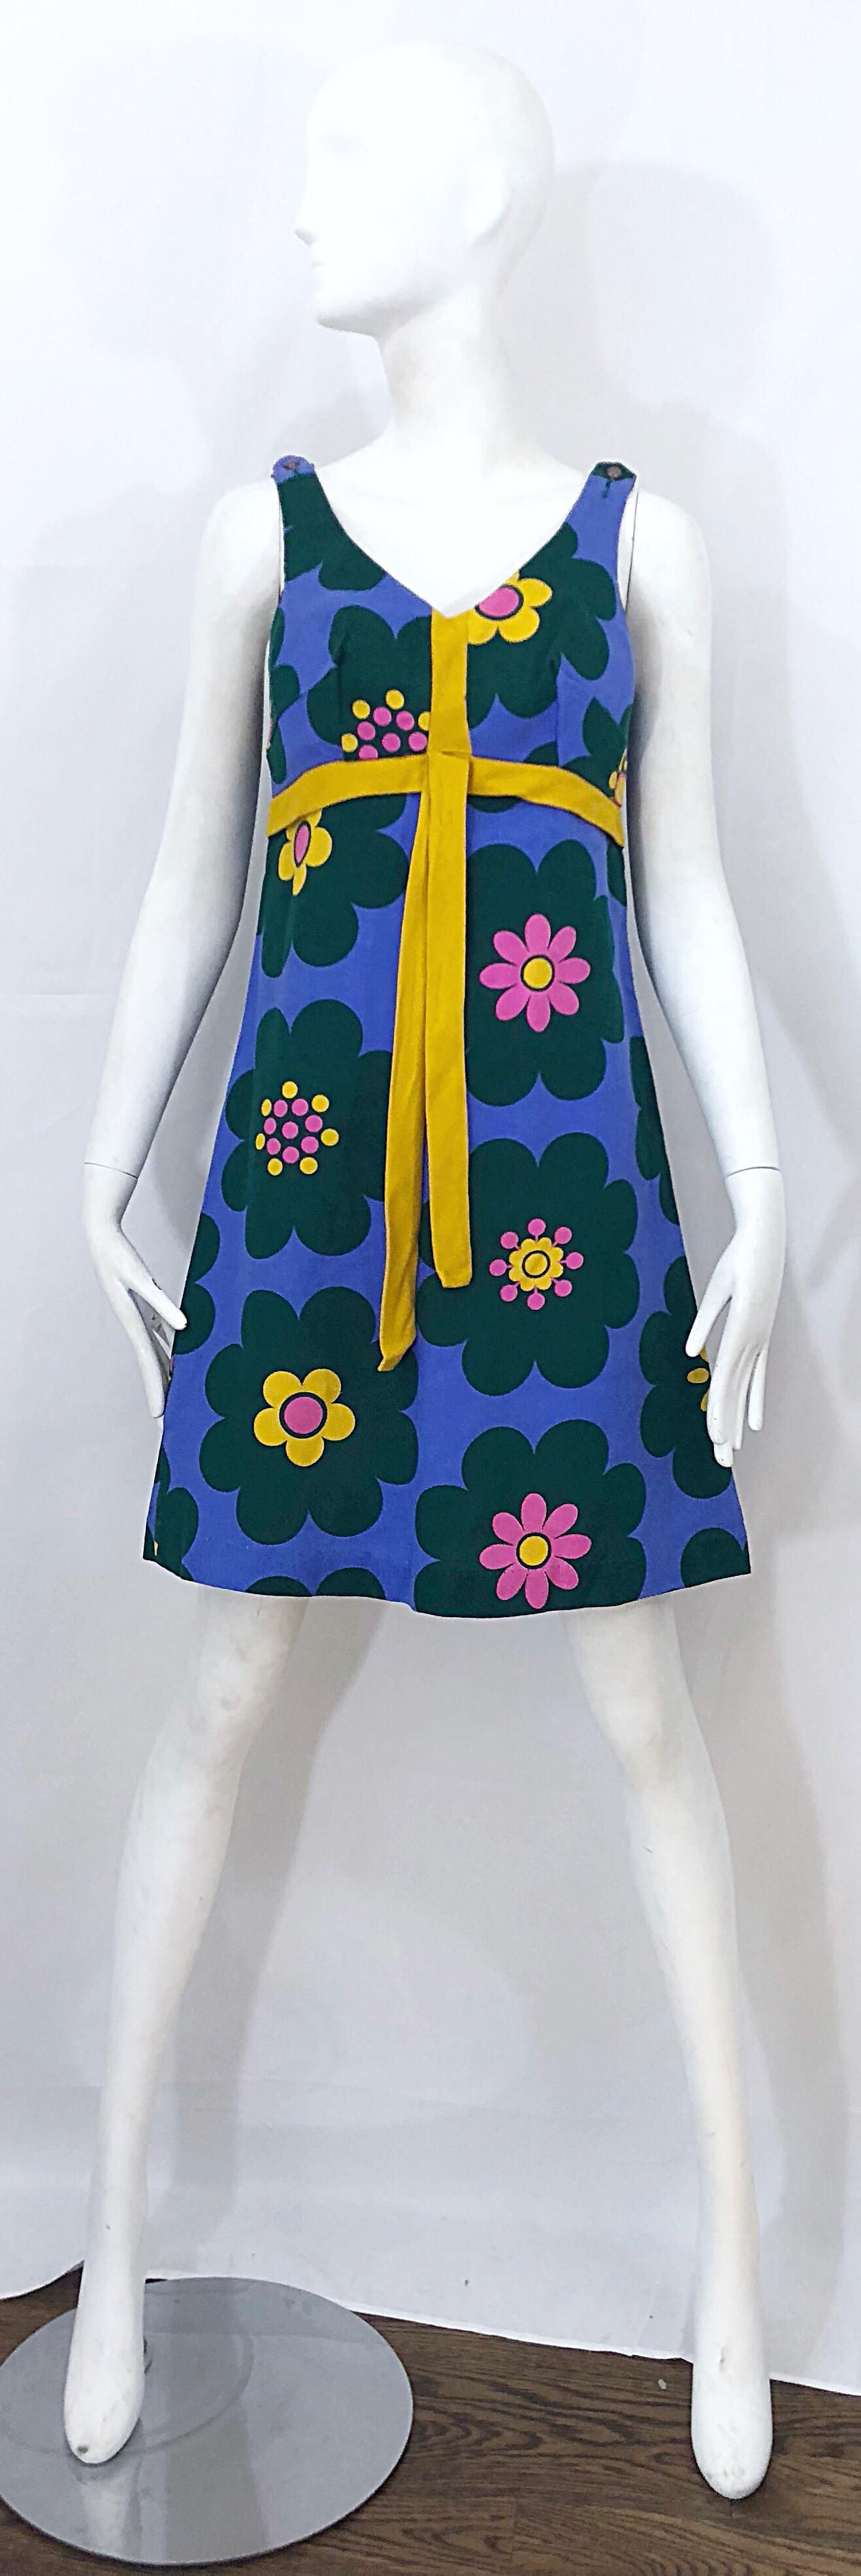 Chic 60s linen flower print sleeveless A-Line dress! Features a purple background, with pink, yellow and green flowers printed throughout. Tailored bodice with a flared skirt. Attached marigold tie detail at waist. Full metal zipper up the back with